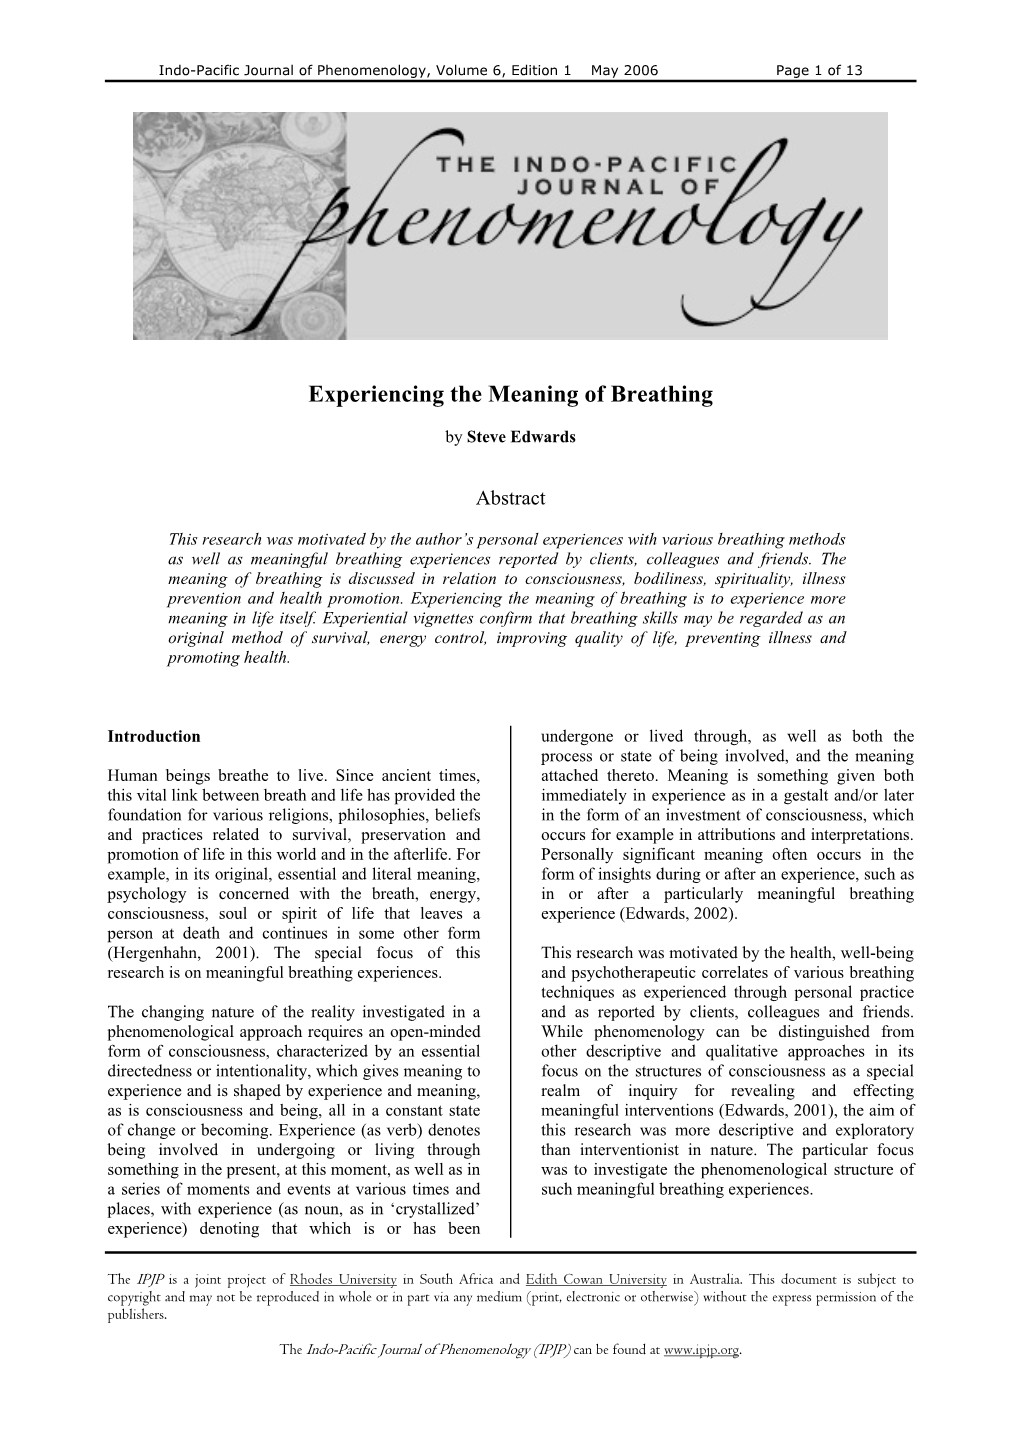 Experiencing the Meaning of Breathing